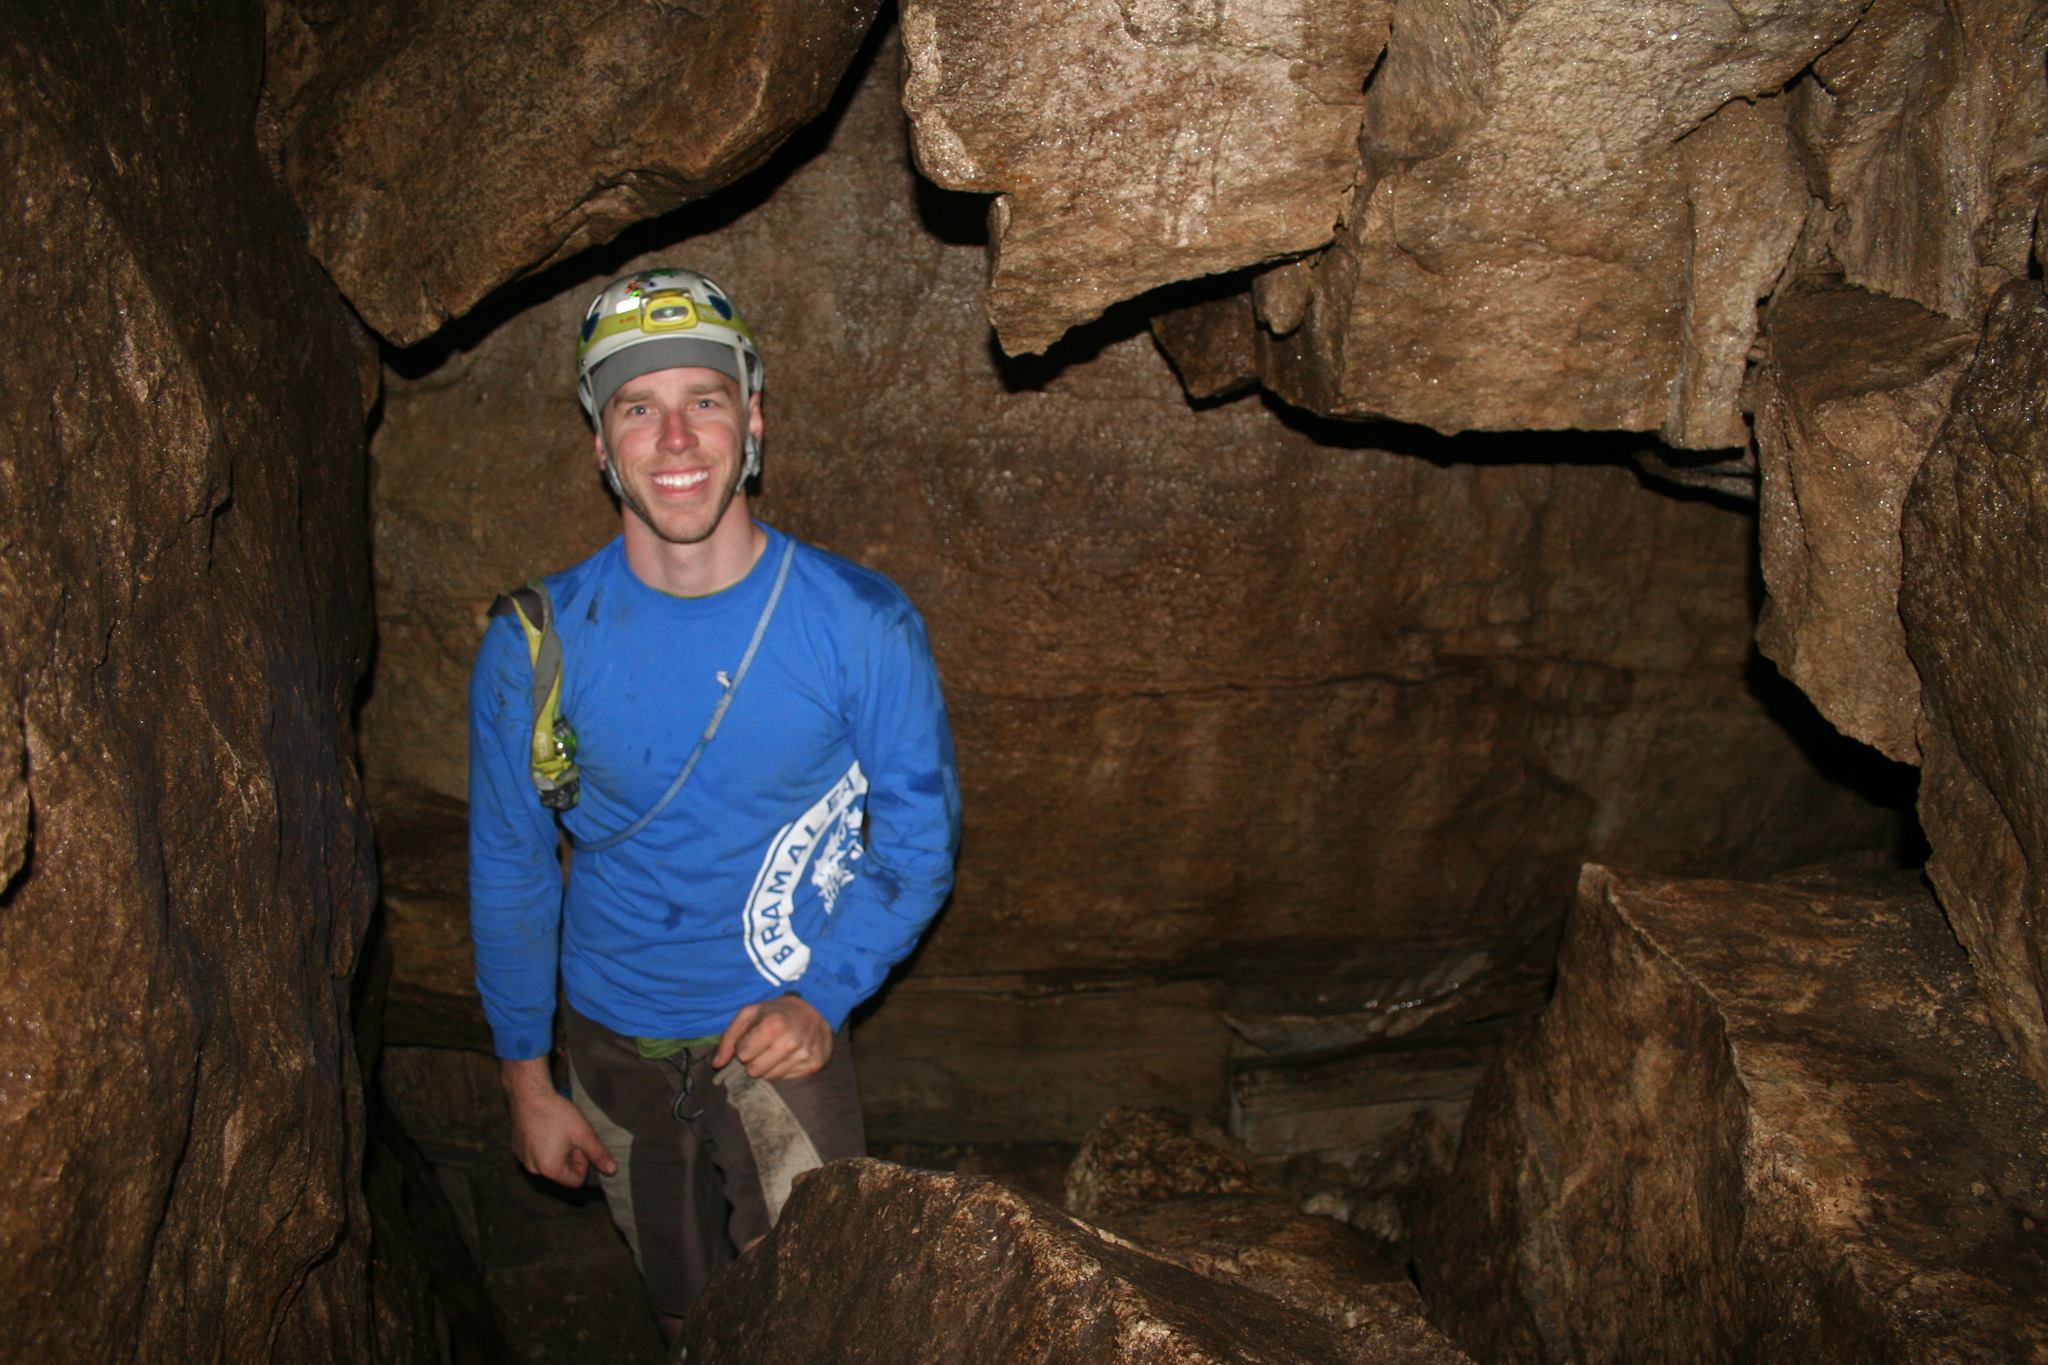 Carlin standing in a cave